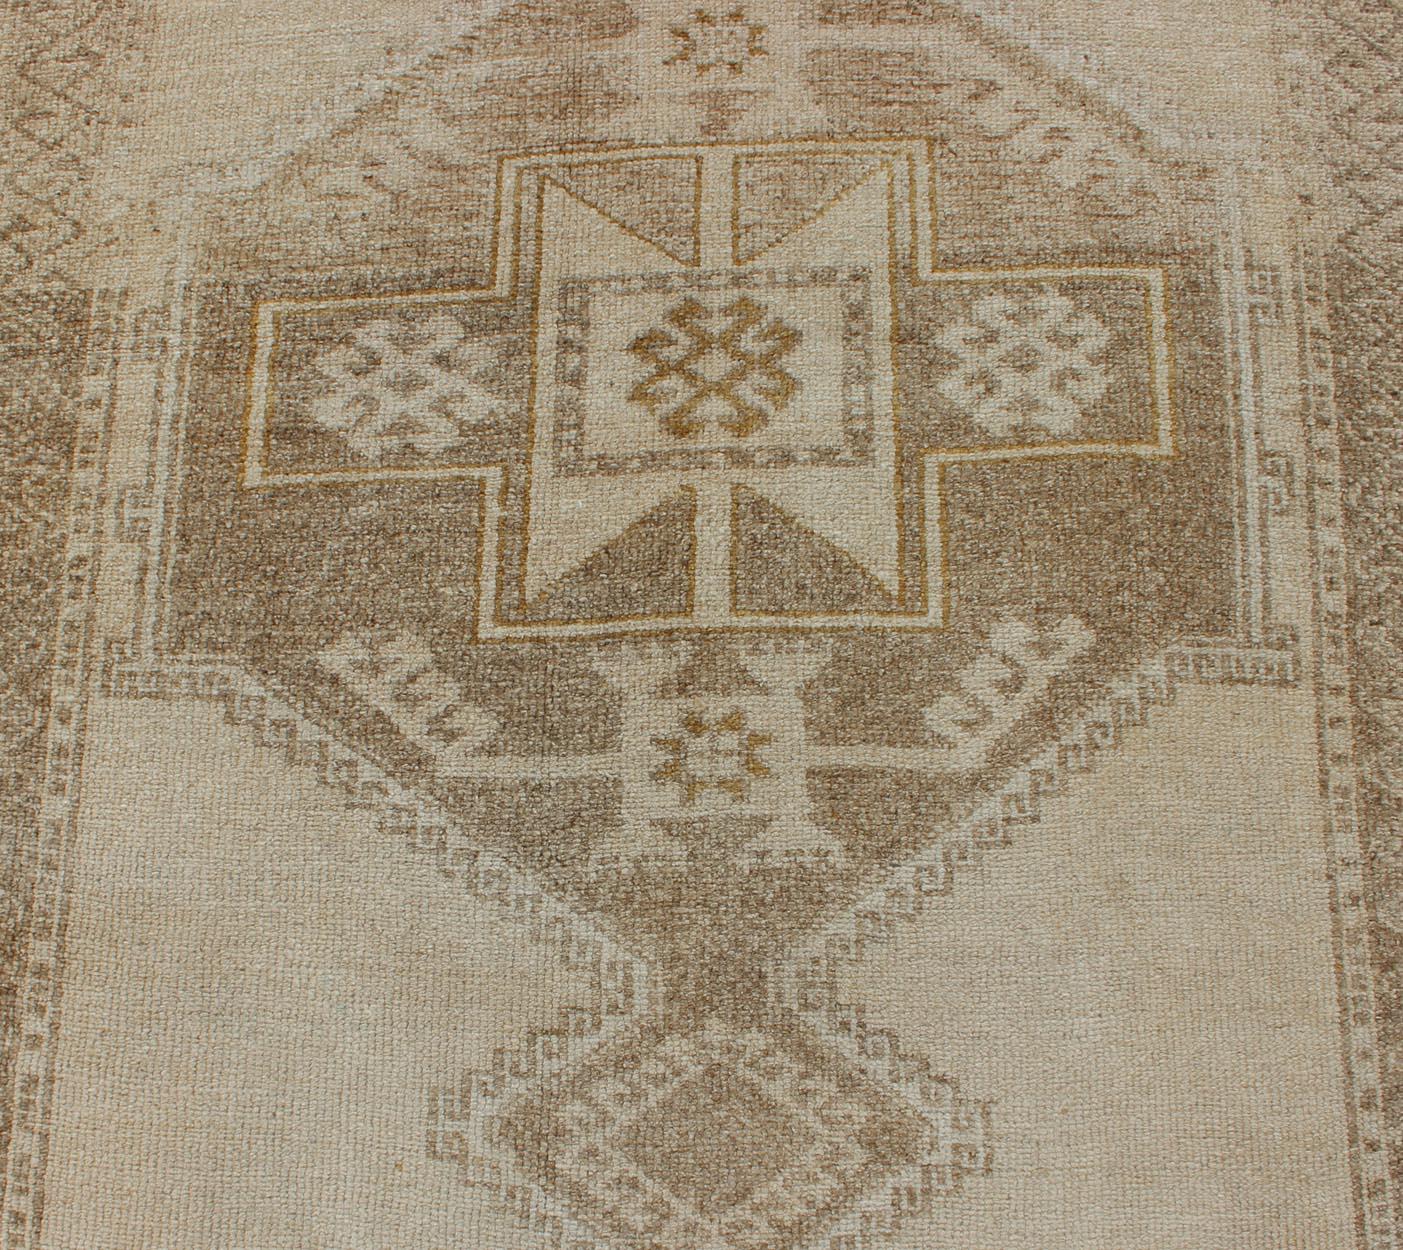 Wool Vintage Oushak Gallery Runner with Three Medallion Design in Taupe, Light Brown For Sale